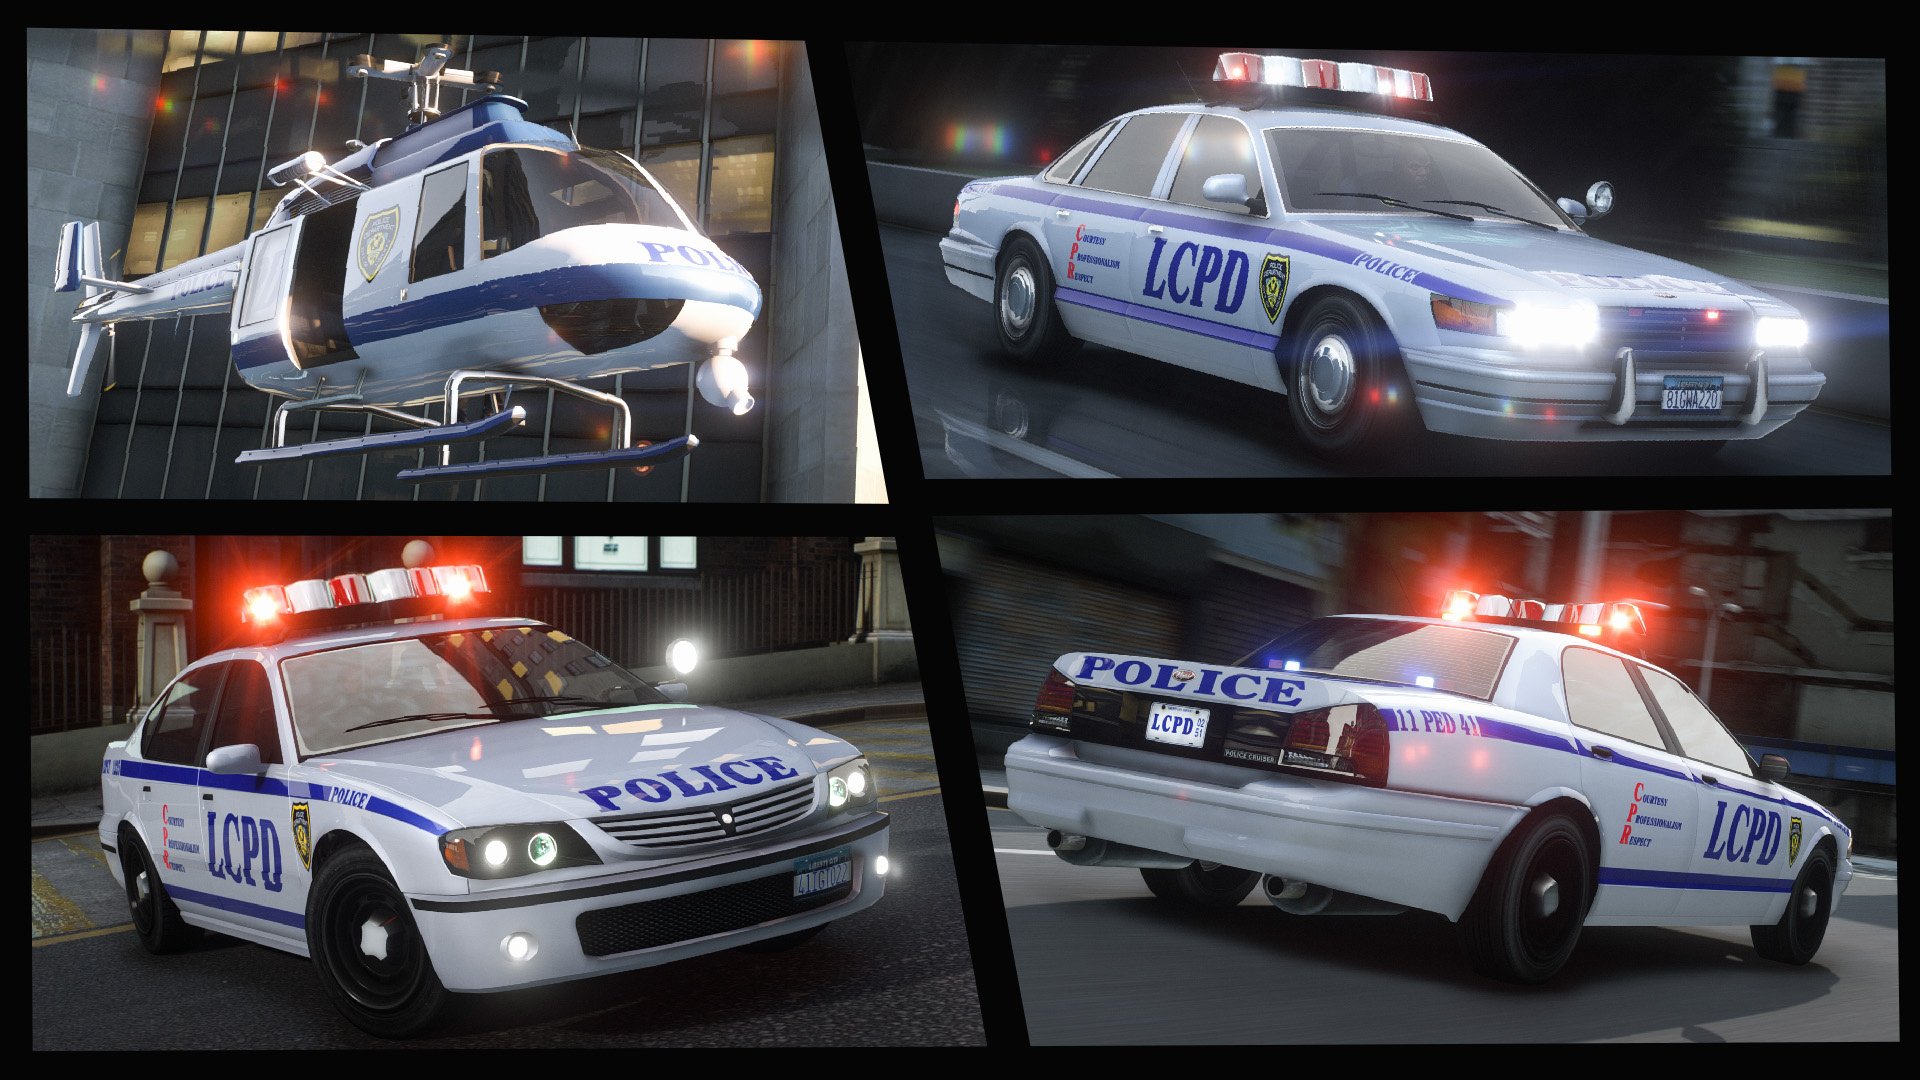 Files for GTA Liberty City Stories: cars, mods, skins